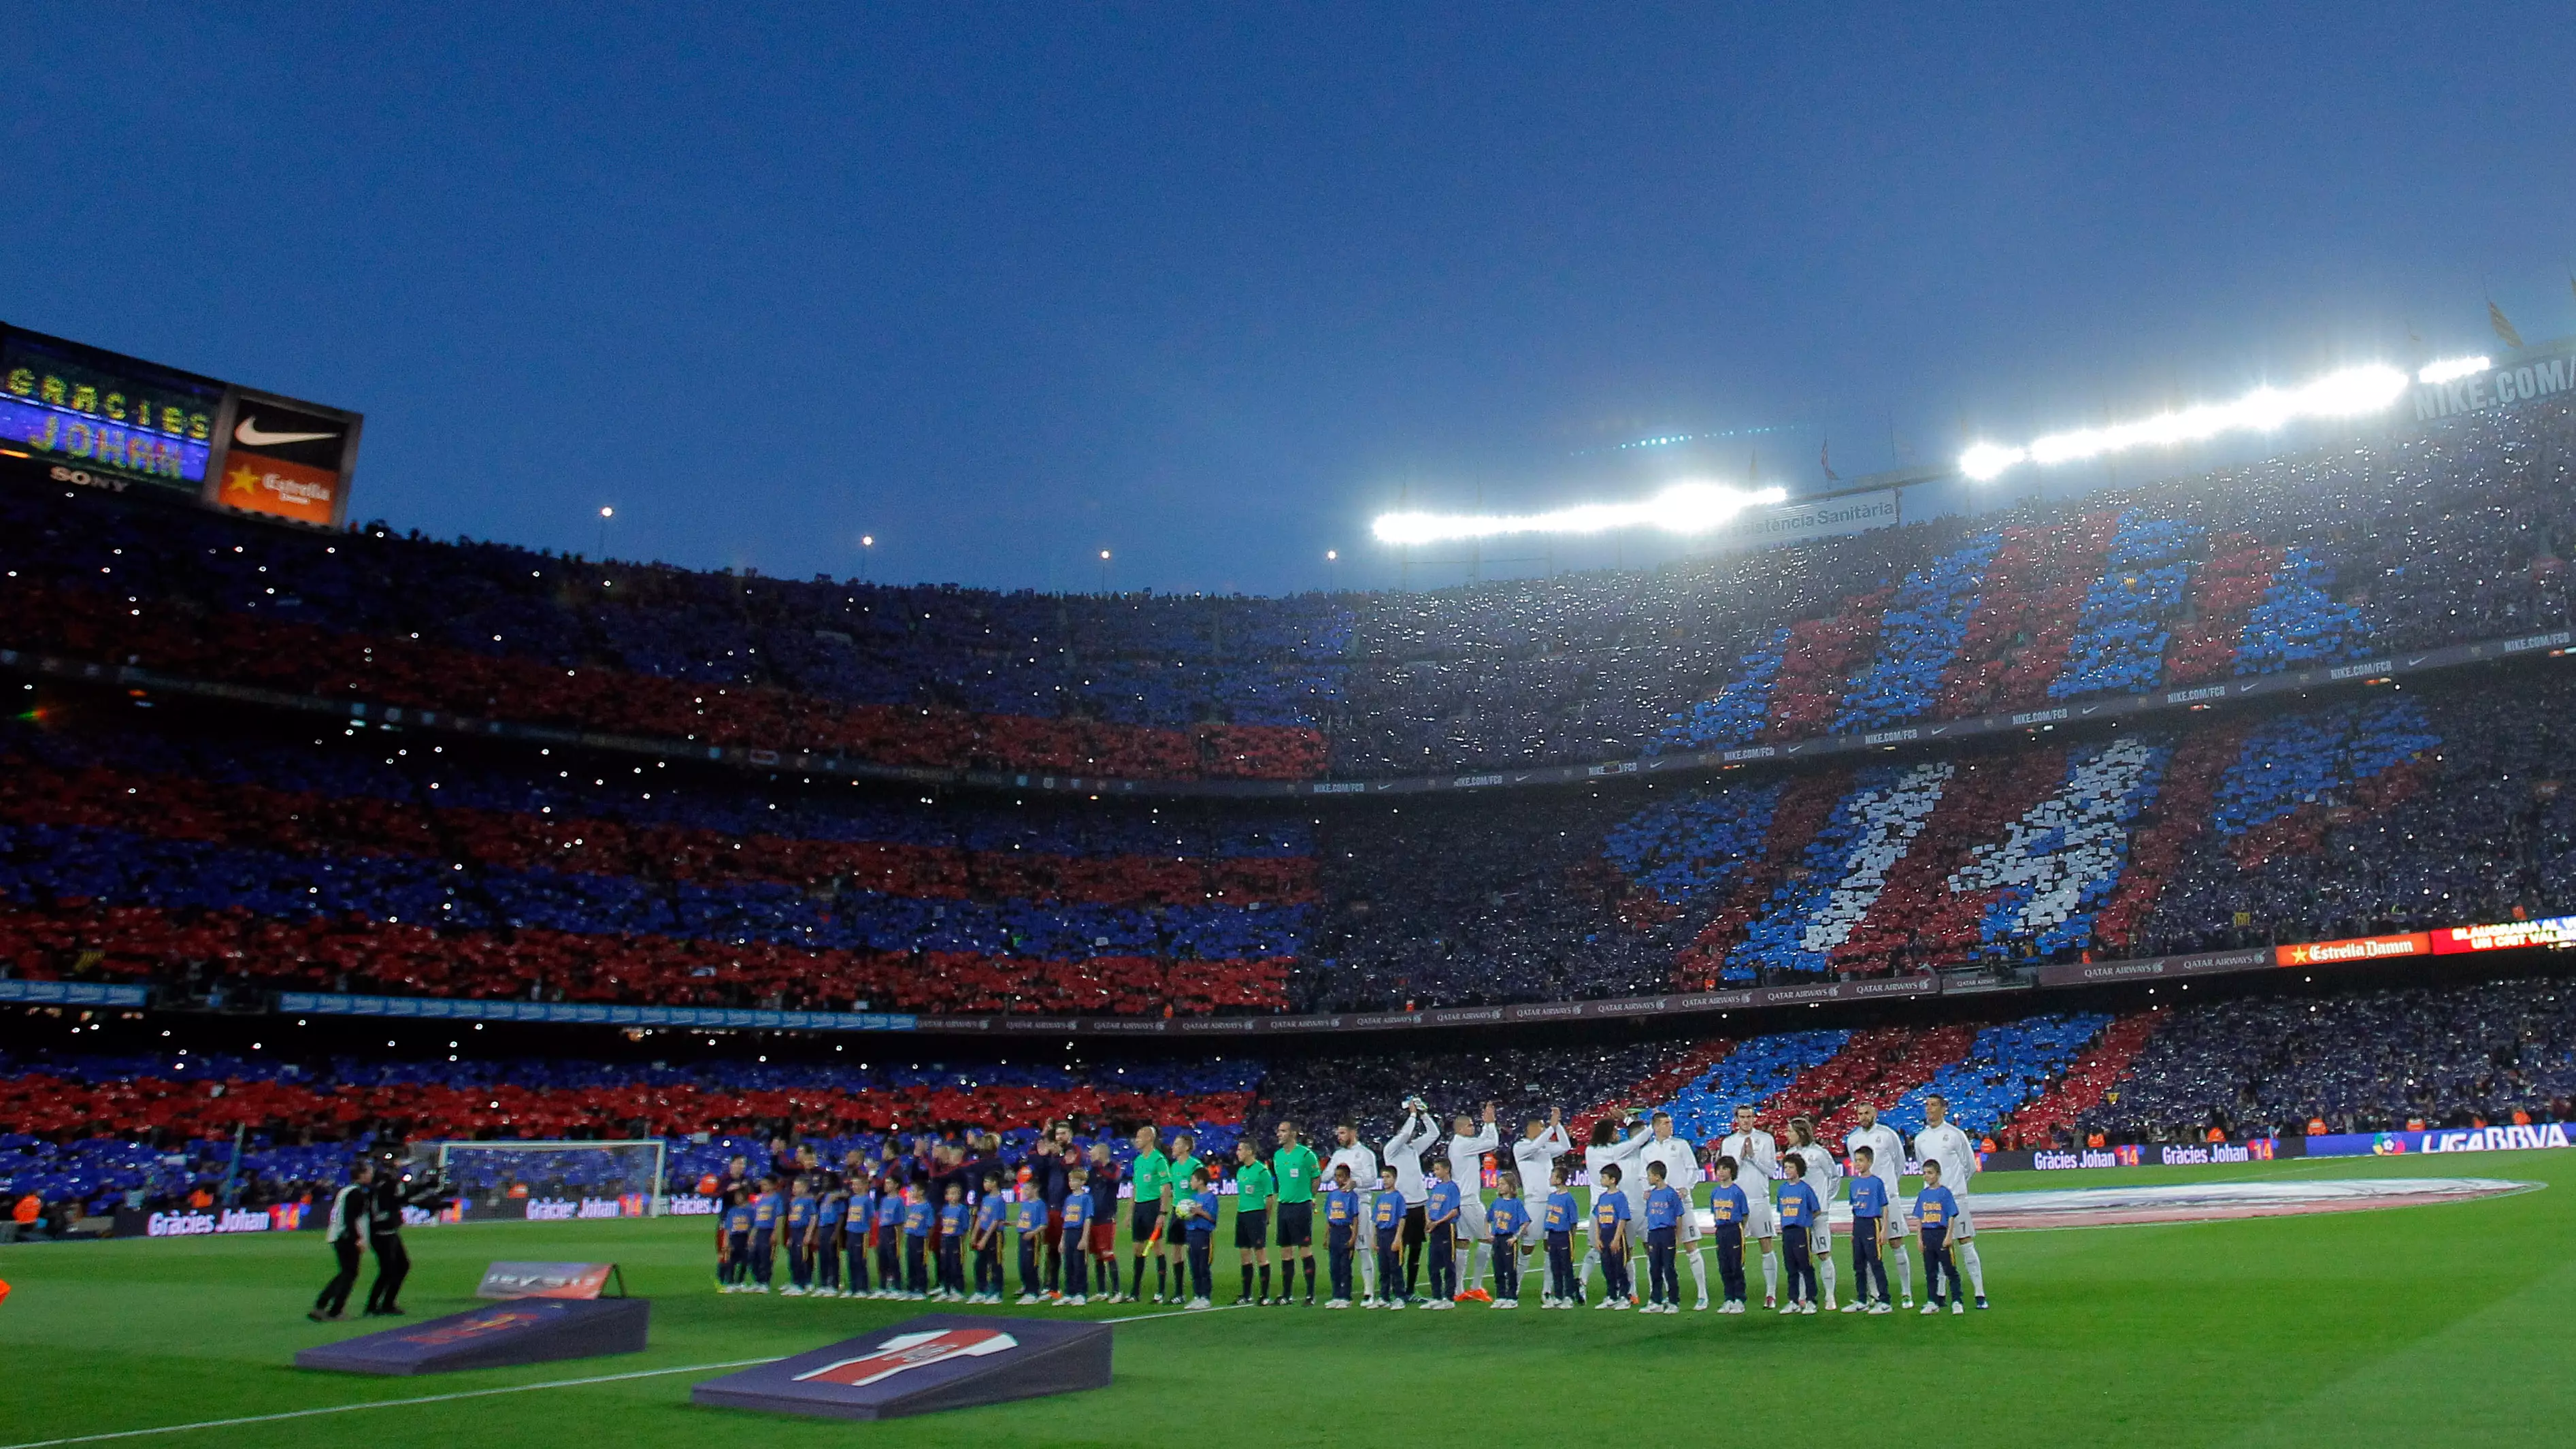 Tickets For Summer El Clasico Held In America Selling For Ridiculous Price